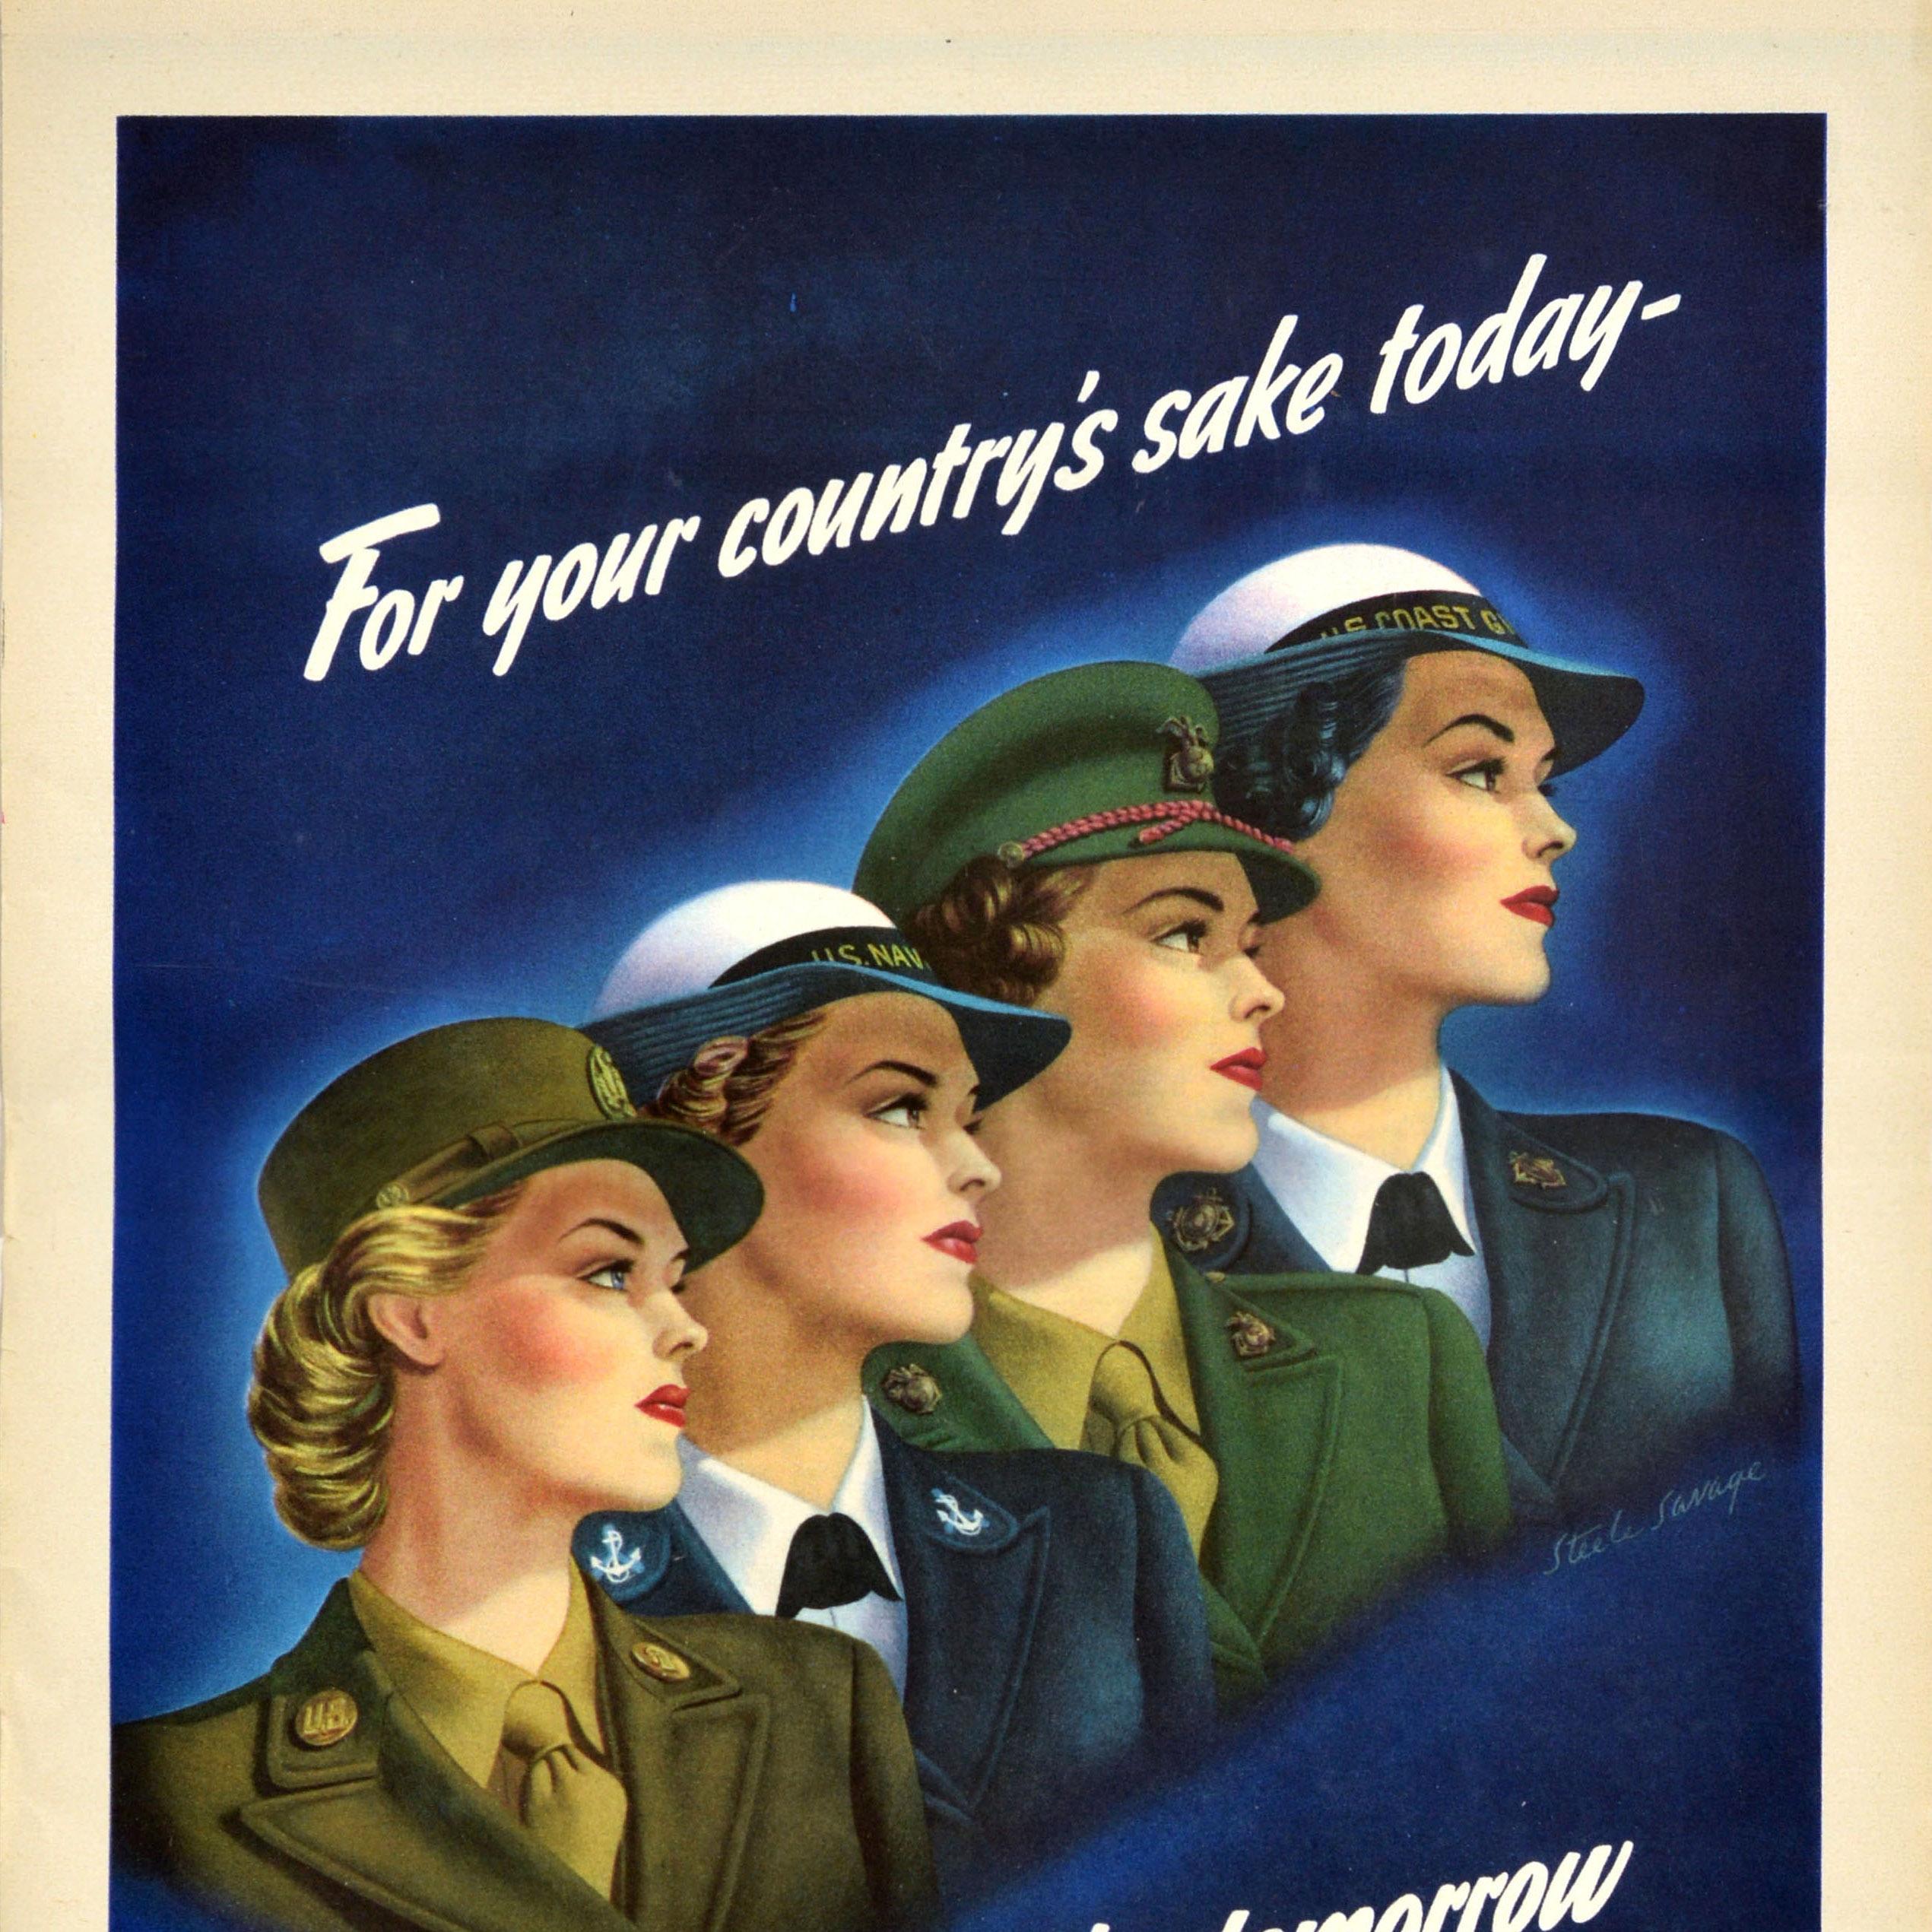 Original Vintage American WWII Recruitment Poster For Your Country's Sake Today In Good Condition For Sale In London, GB